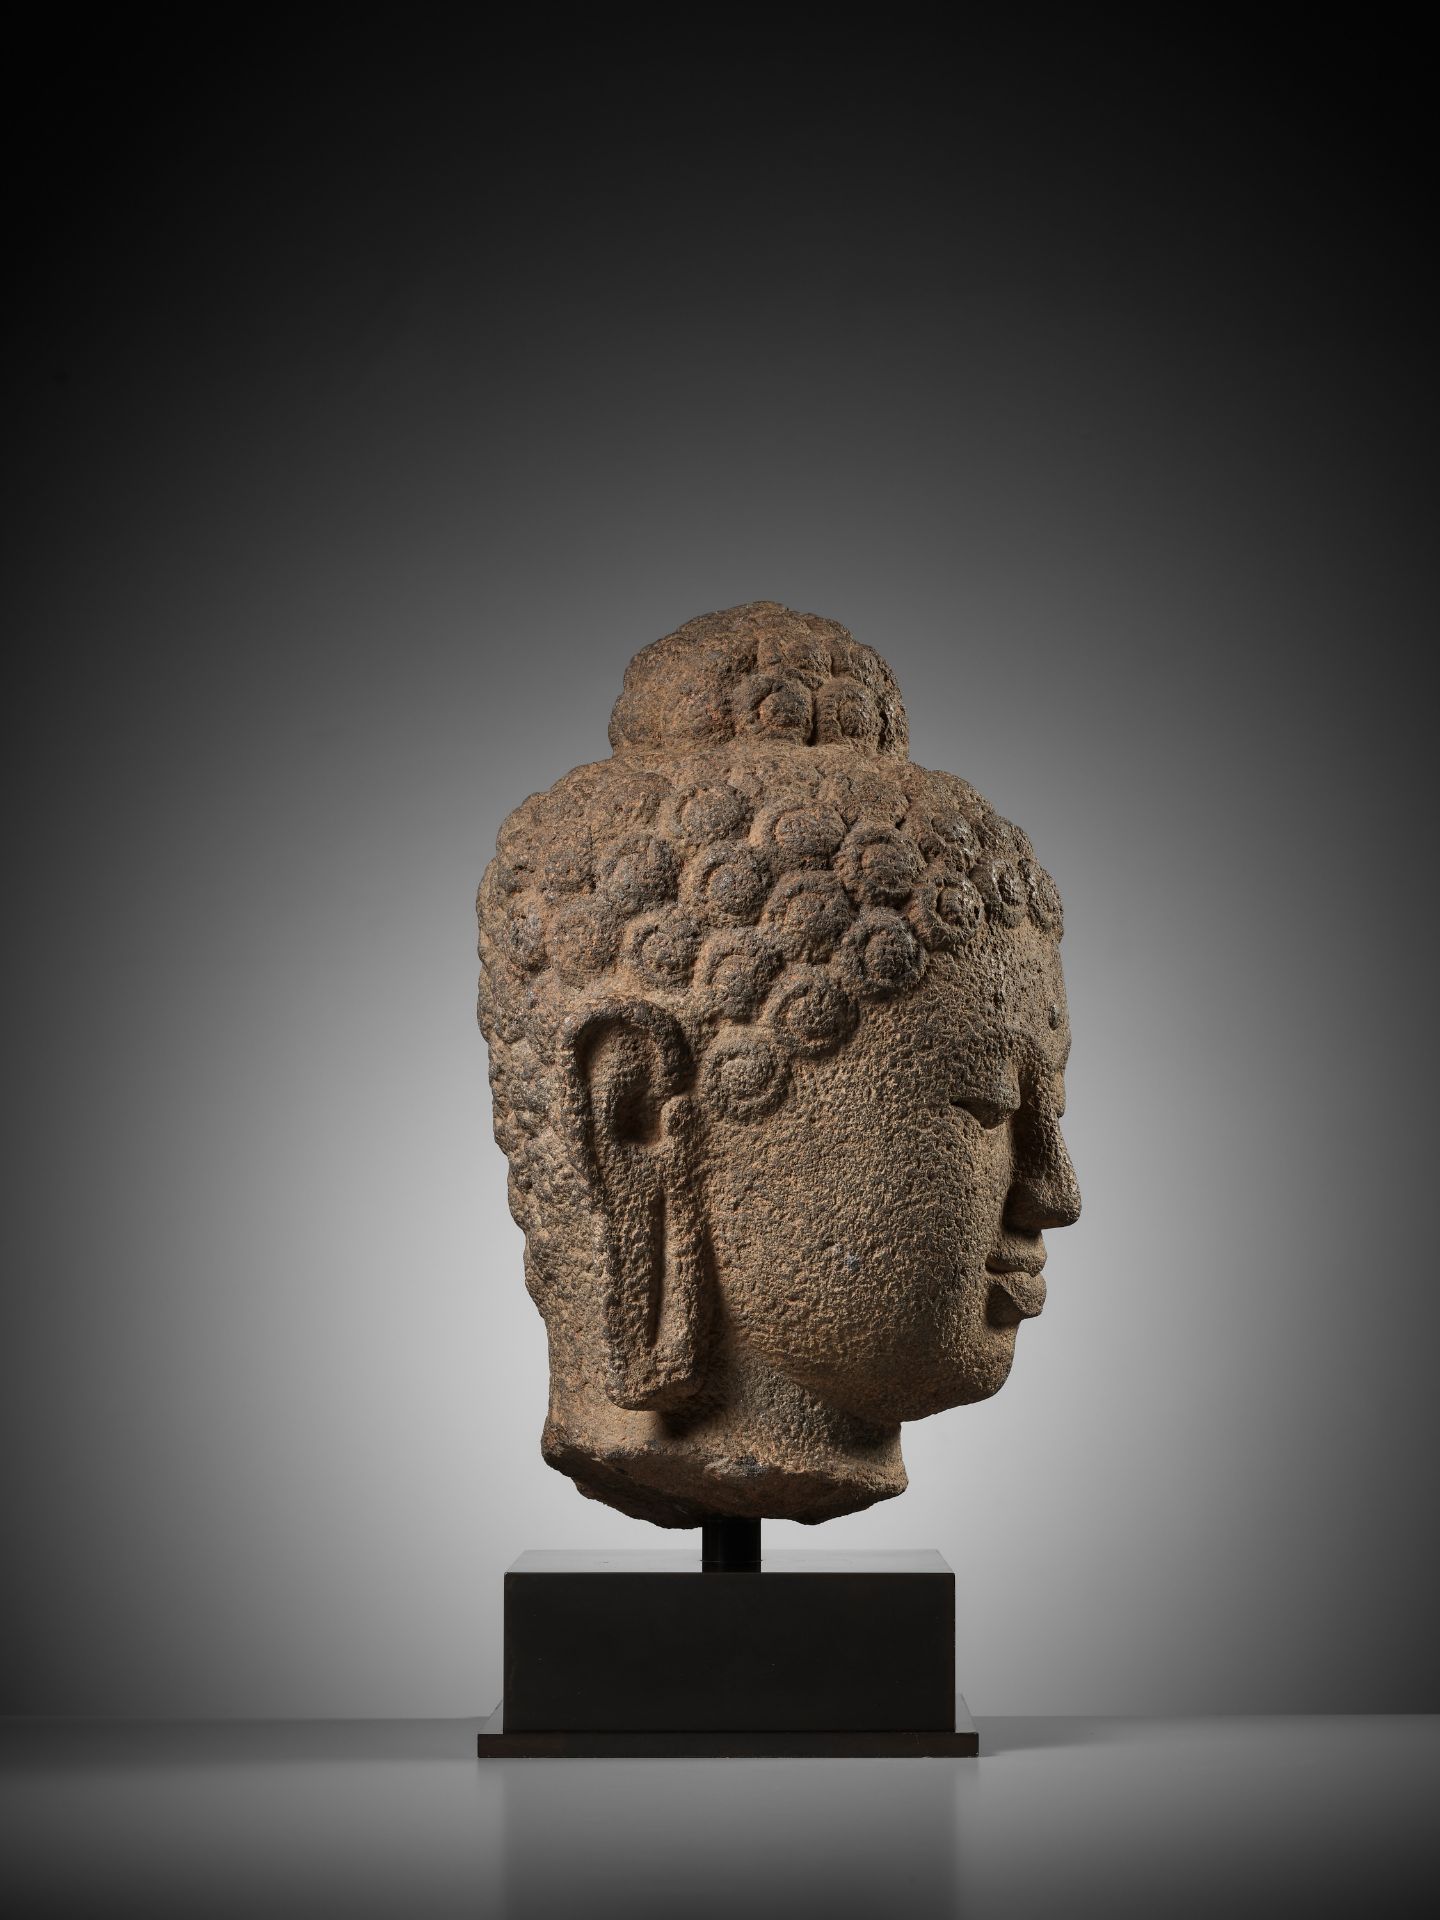 A LARGE ANDESITE HEAD OF BUDDHA, INDONESIA, CENTRAL JAVA, 9TH CENTURY - Image 8 of 10